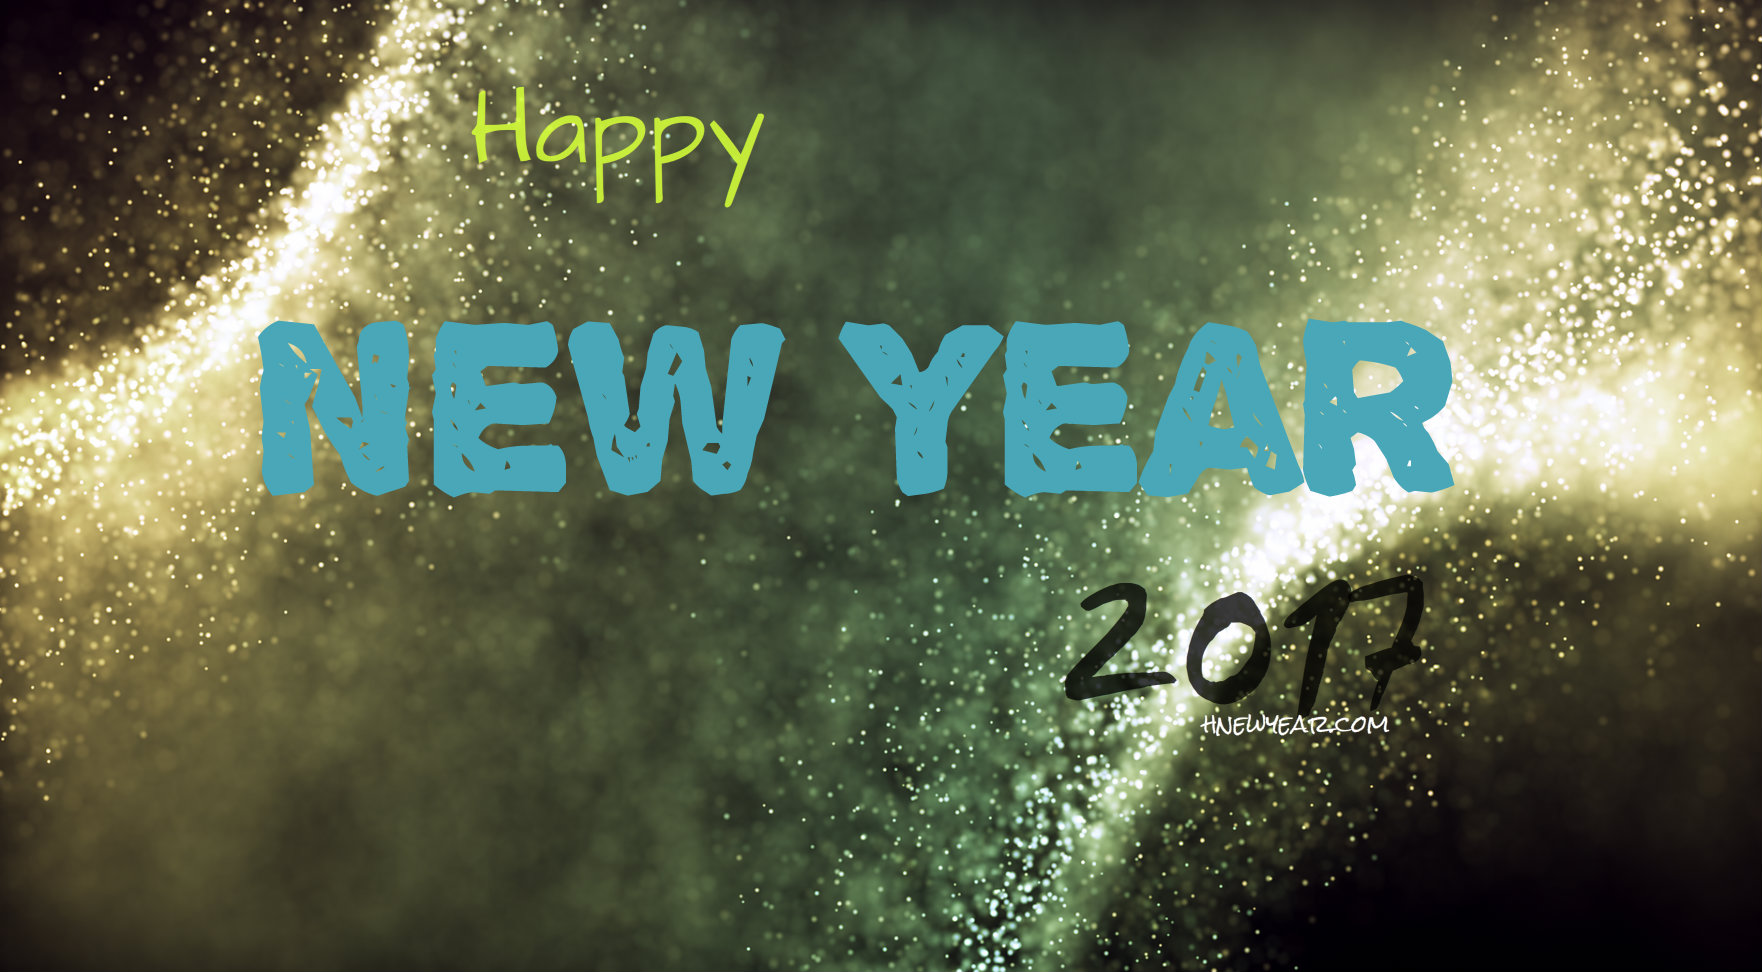 Advance Happy New Year Wishes Image HD Wallpaper